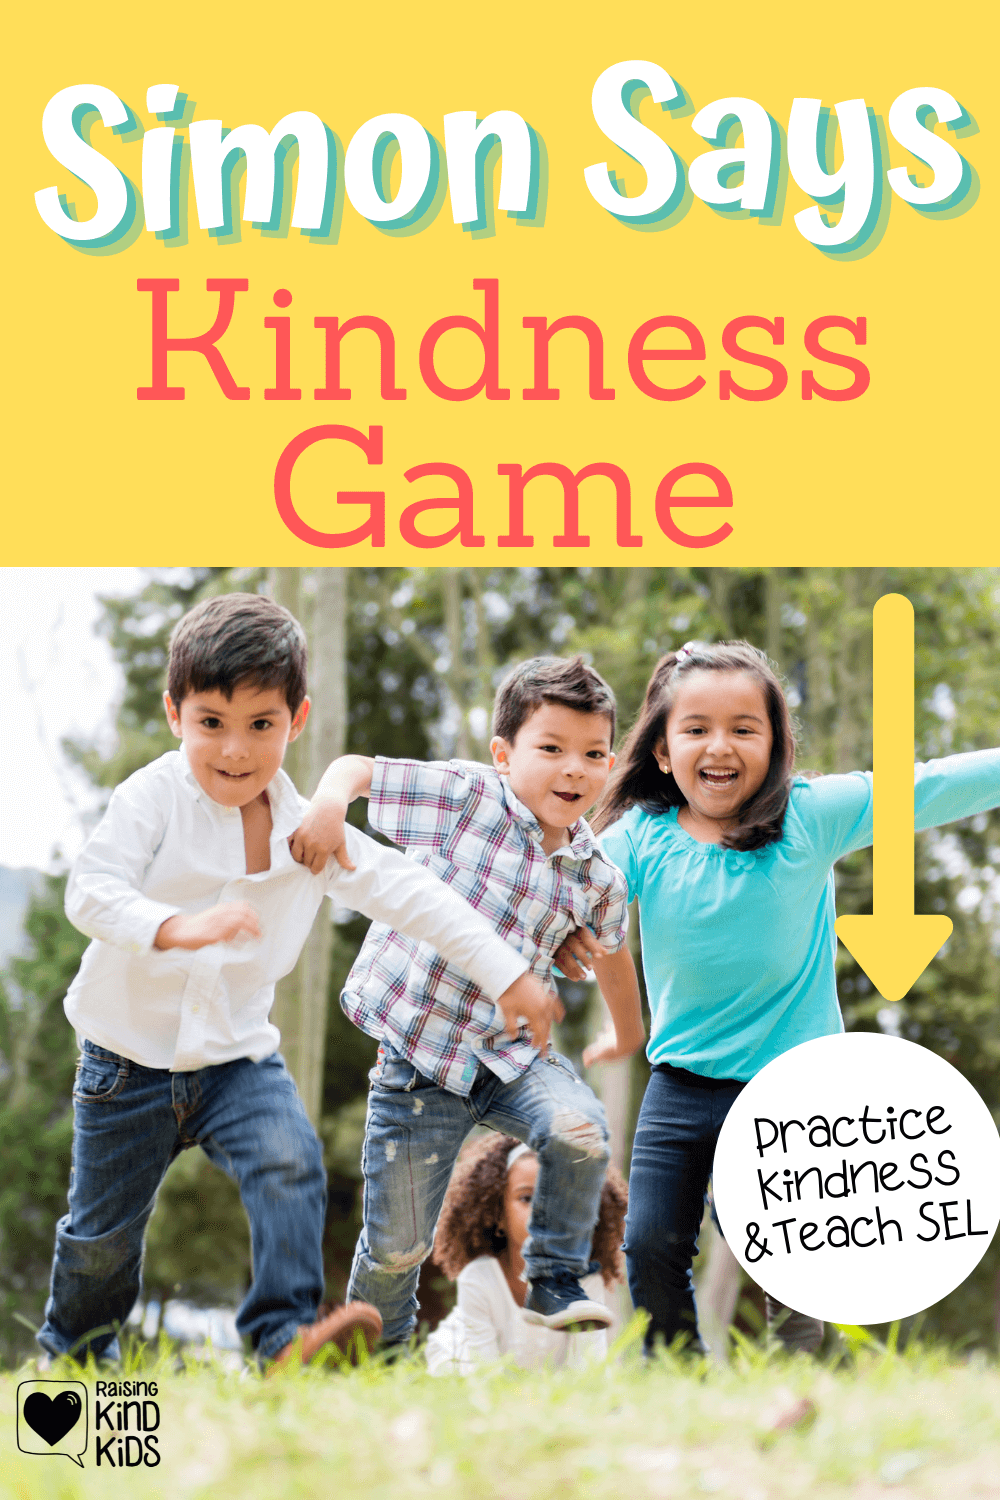 Use this Simon Says kindness game to turn learning about kindness and sel into a fun, hands on game kids love to play. 